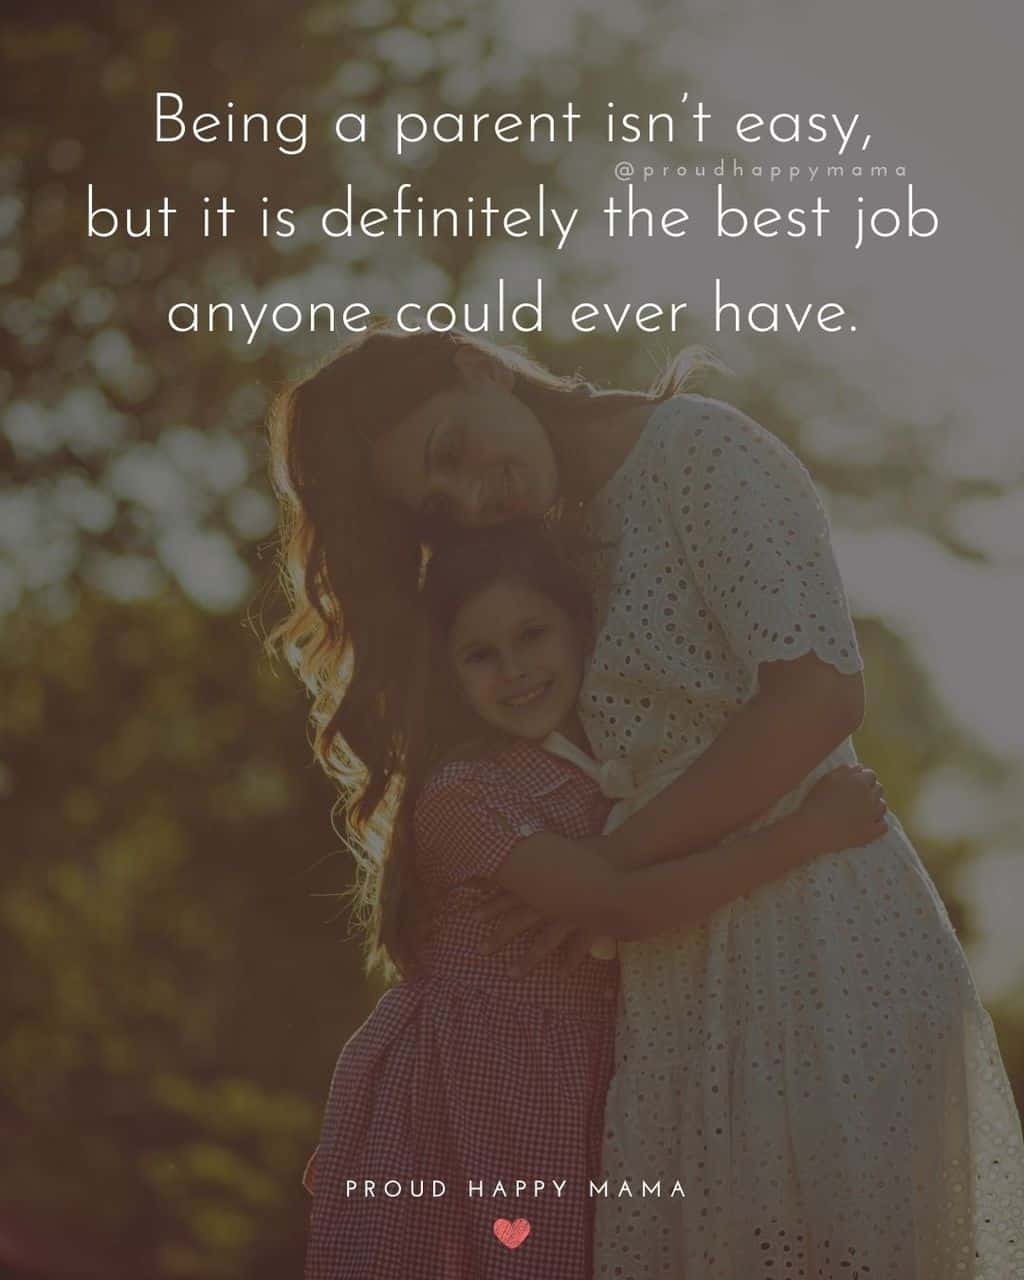 Parenting Quotes - Being a parent isn’t easy, but it is definitely the best job anyone could ever have.’